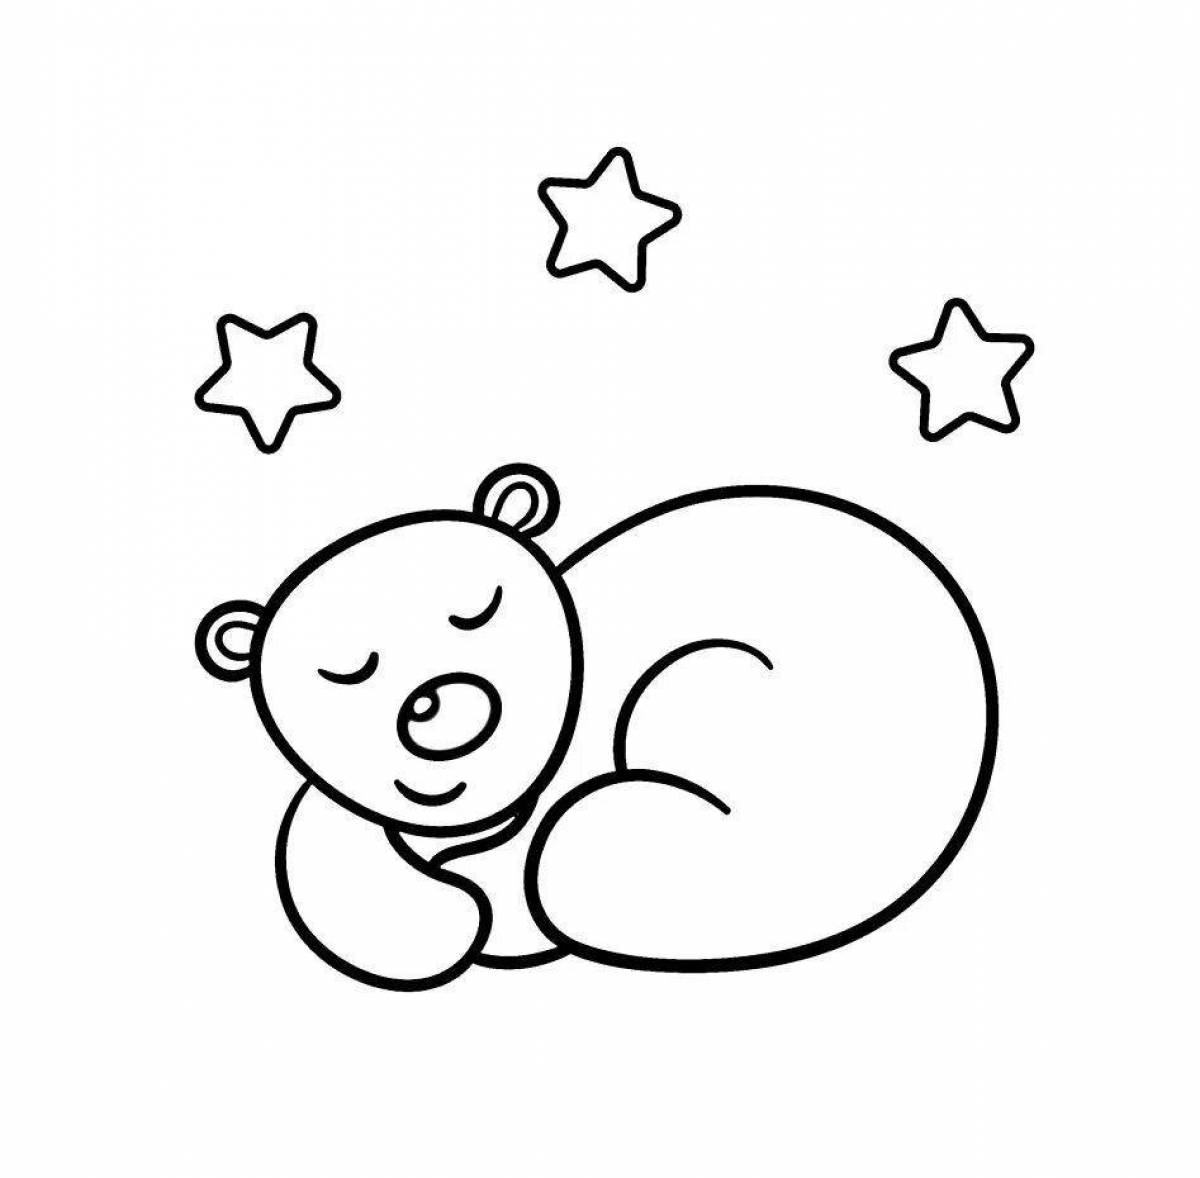 Adorable bear on the moon coloring book